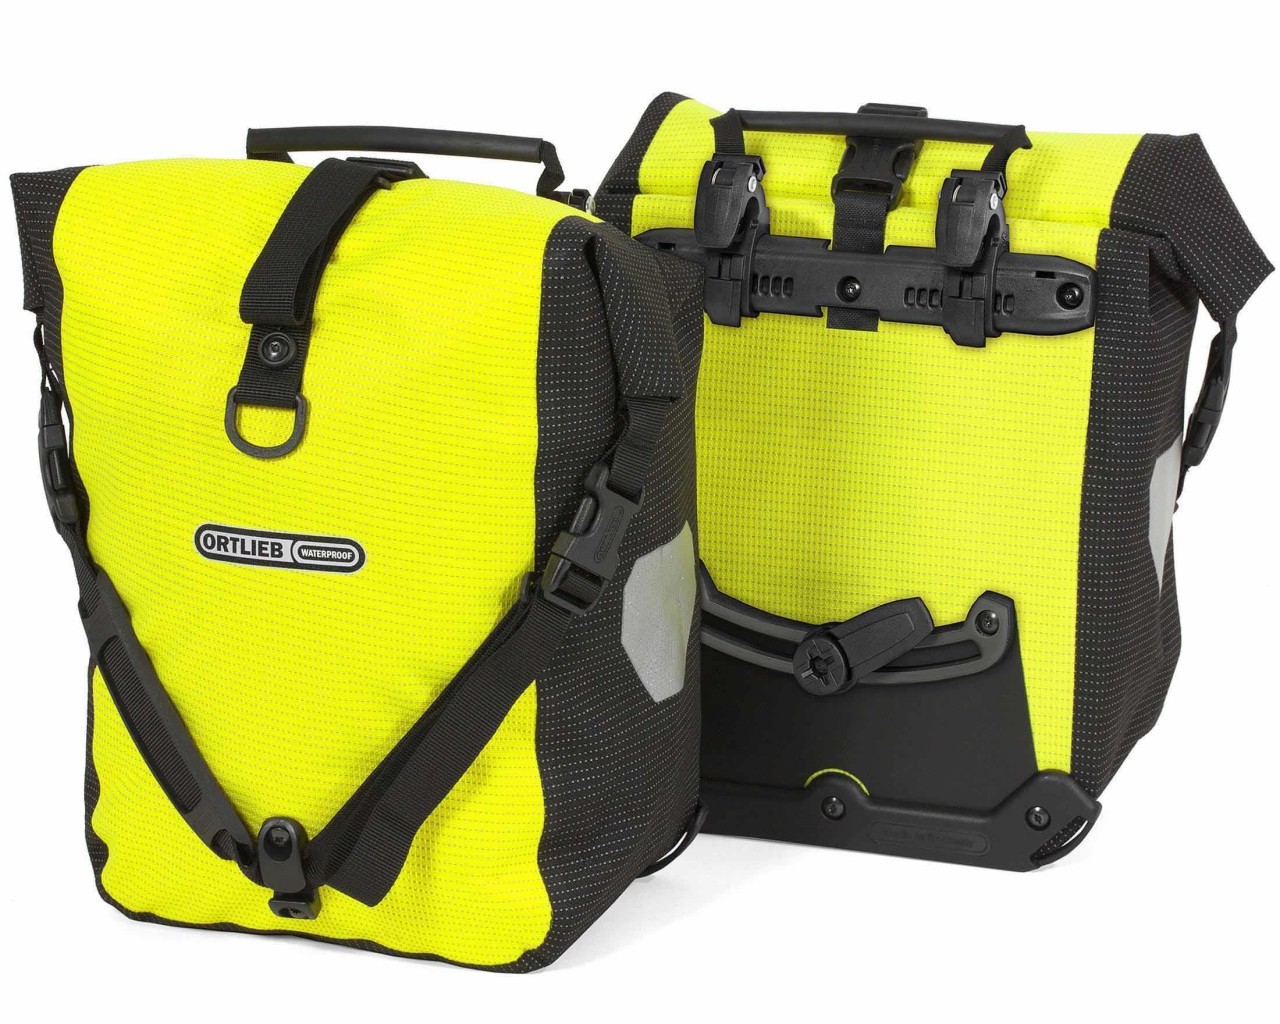 Ortlieb Front-Roller QL2.1 High Visibility waterproof cycle bags (pair) PVC-free | neon yellow-black reflex